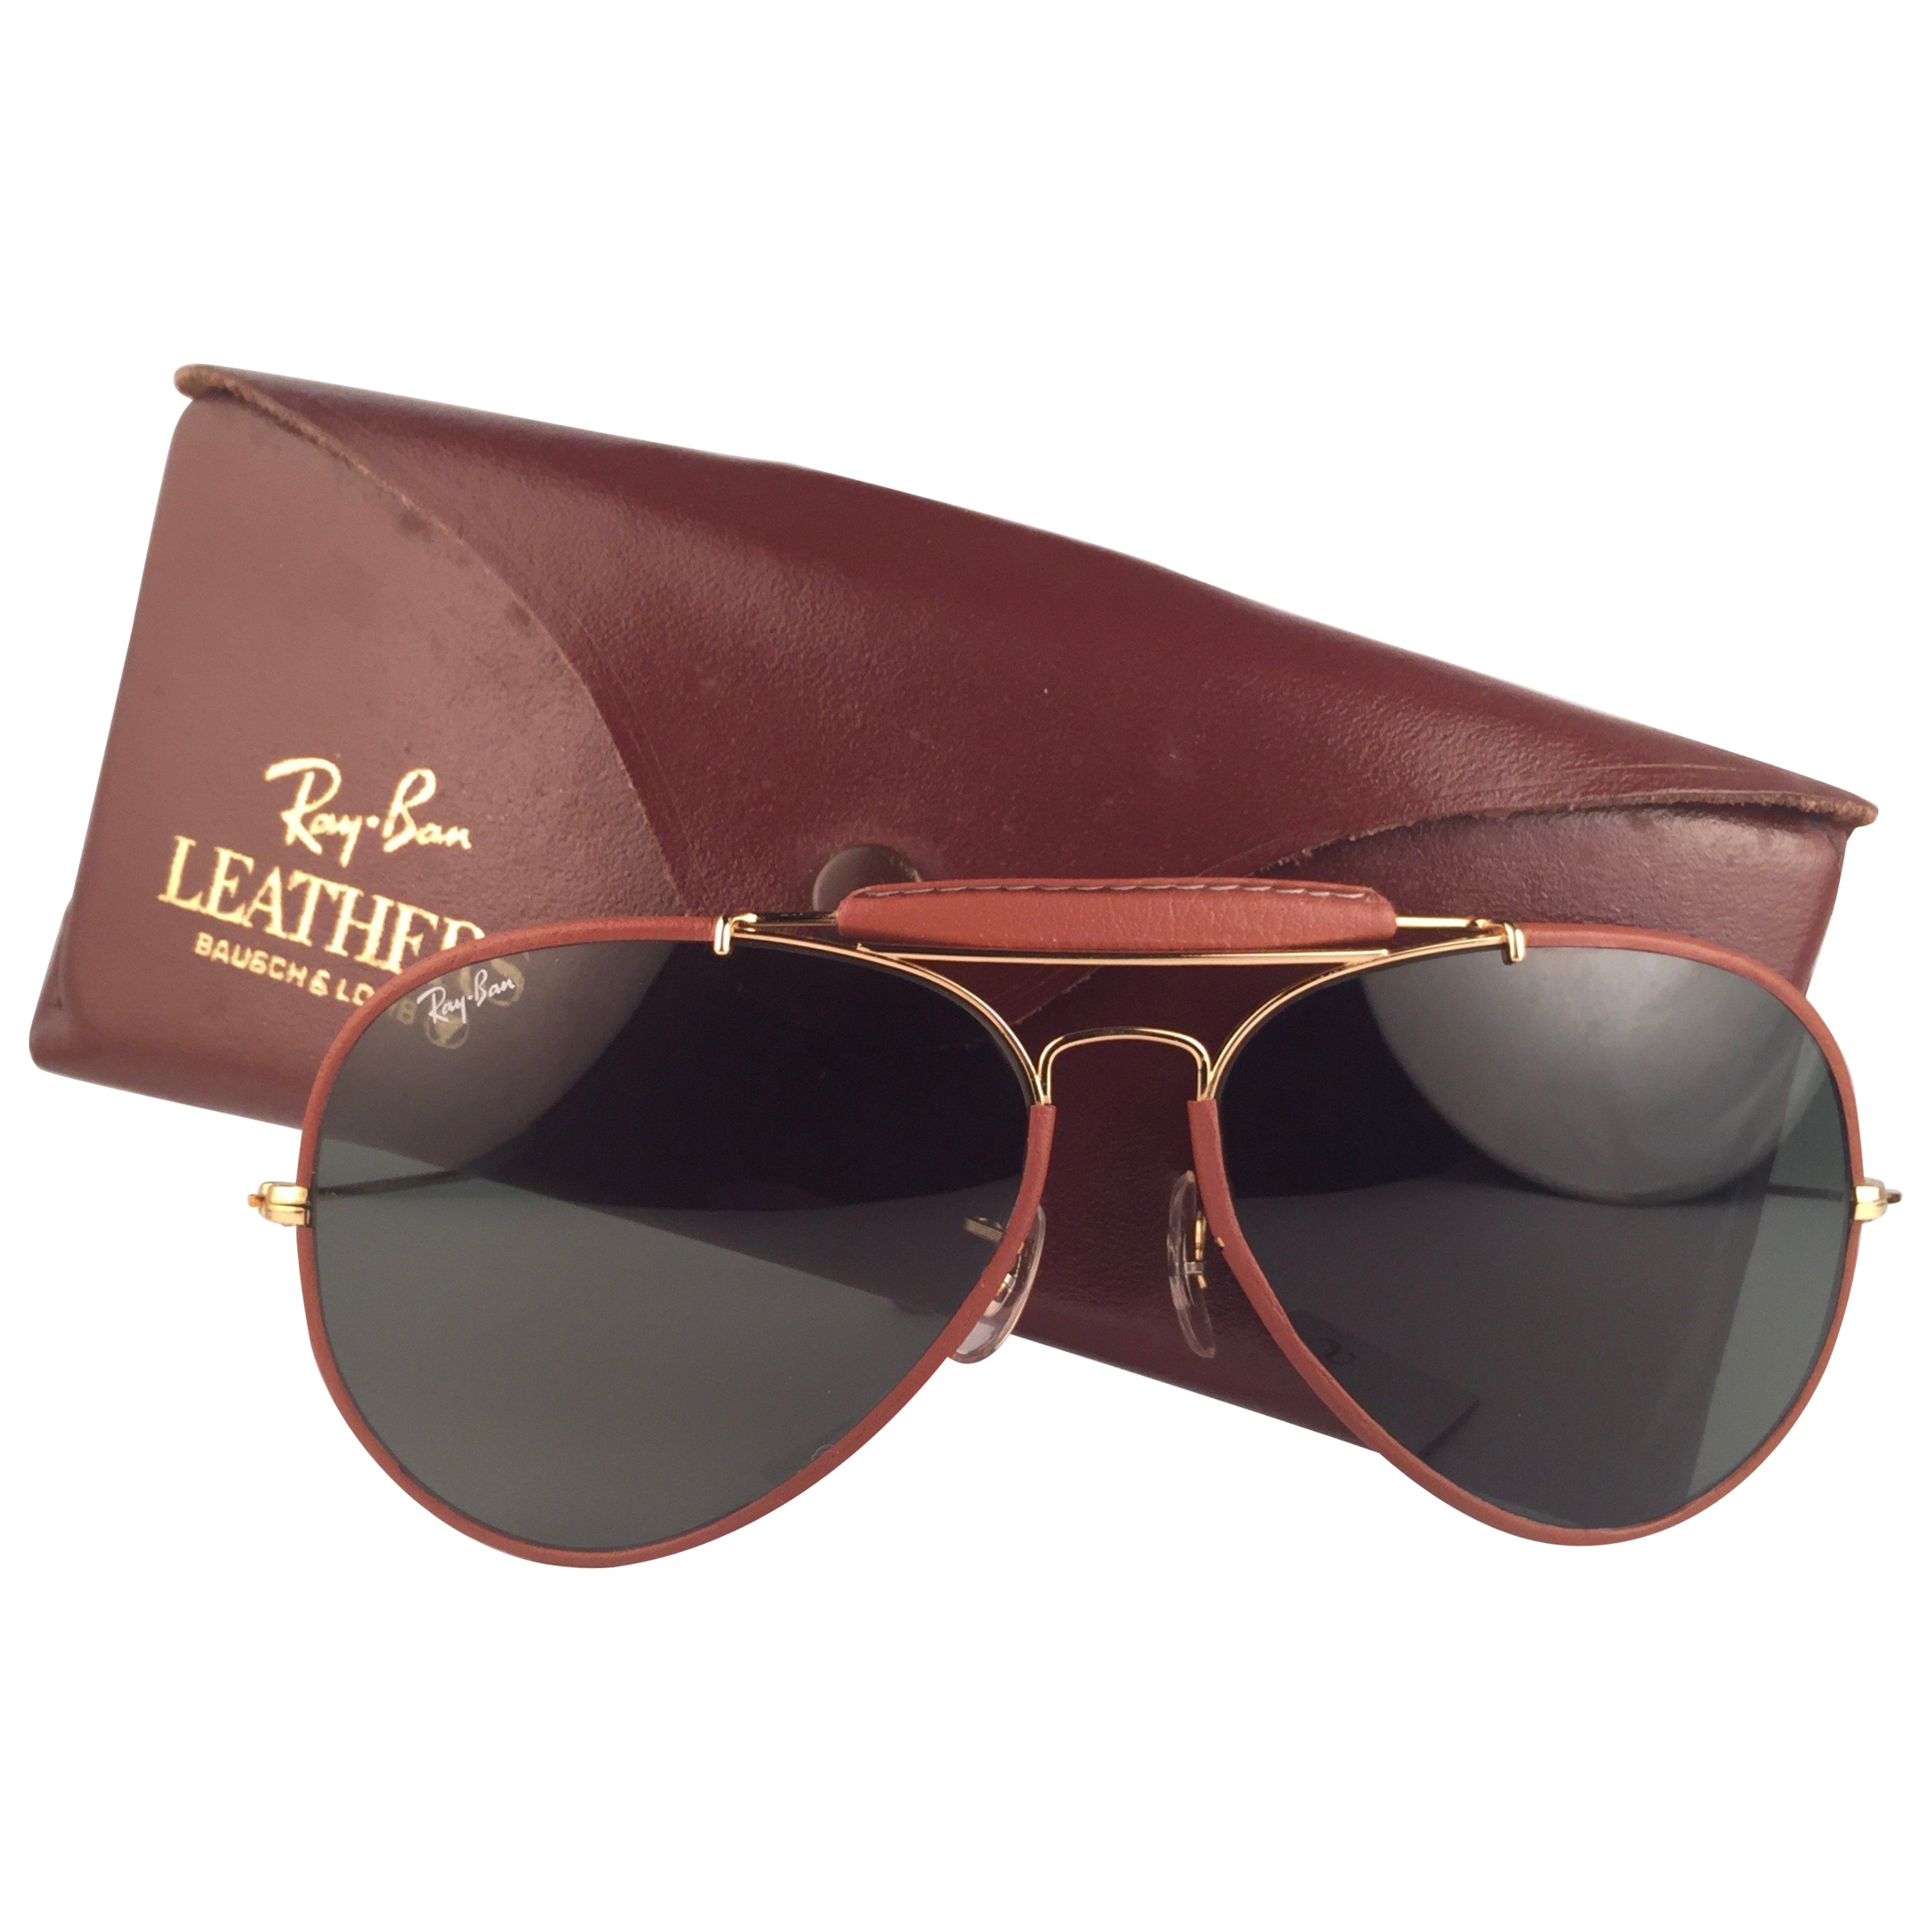 ray ban with leather trim